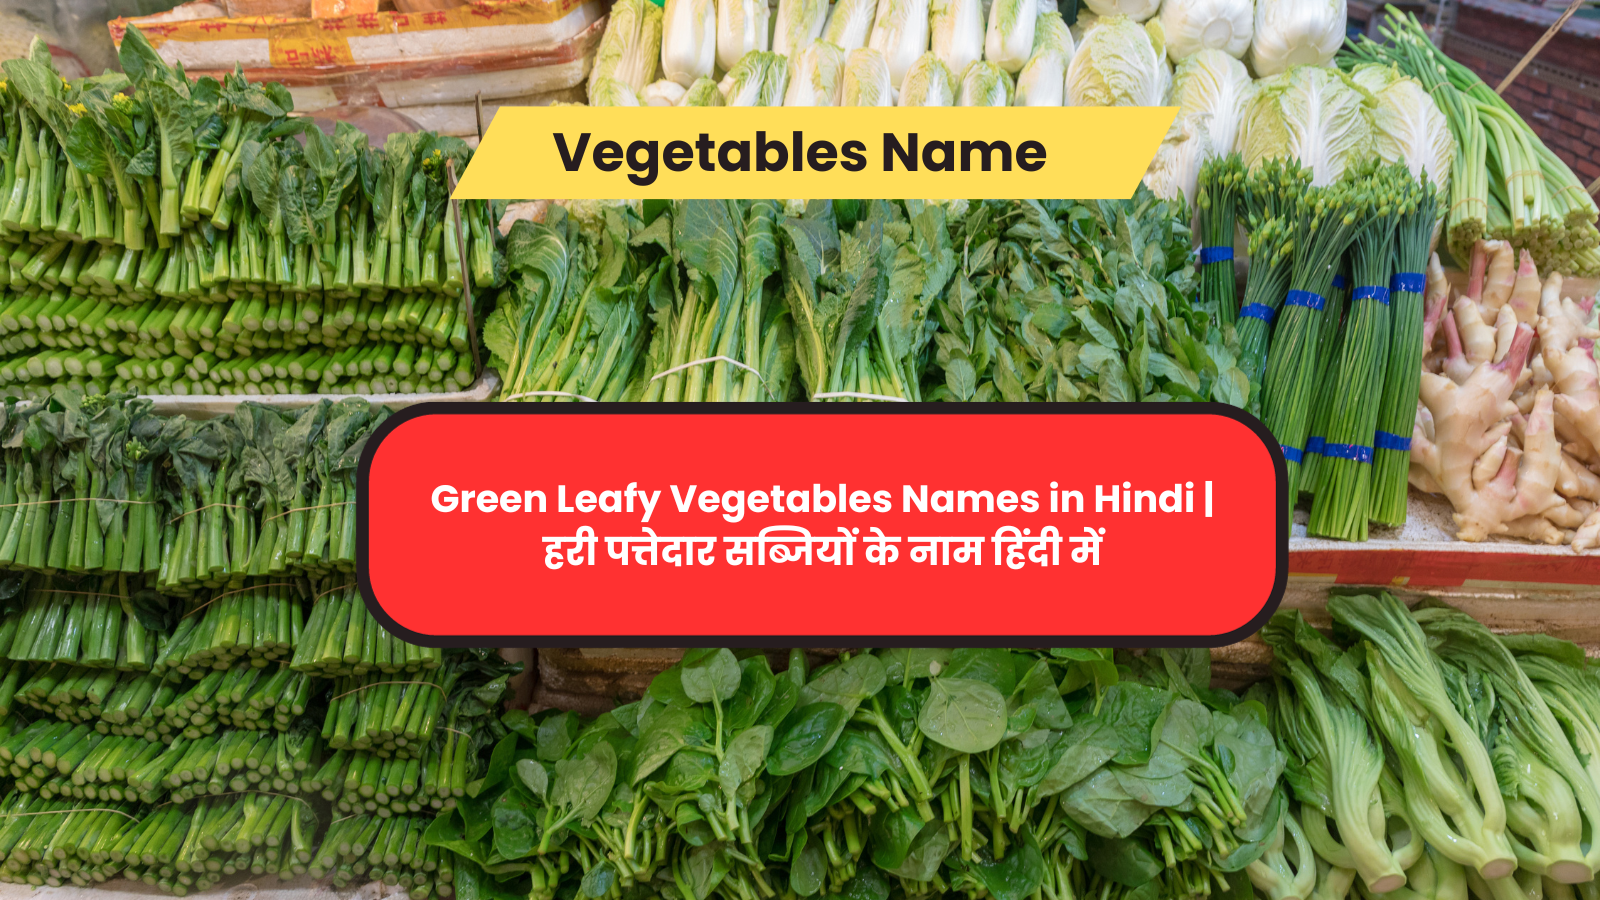 Green Leafy Vegetables Names in Hindi